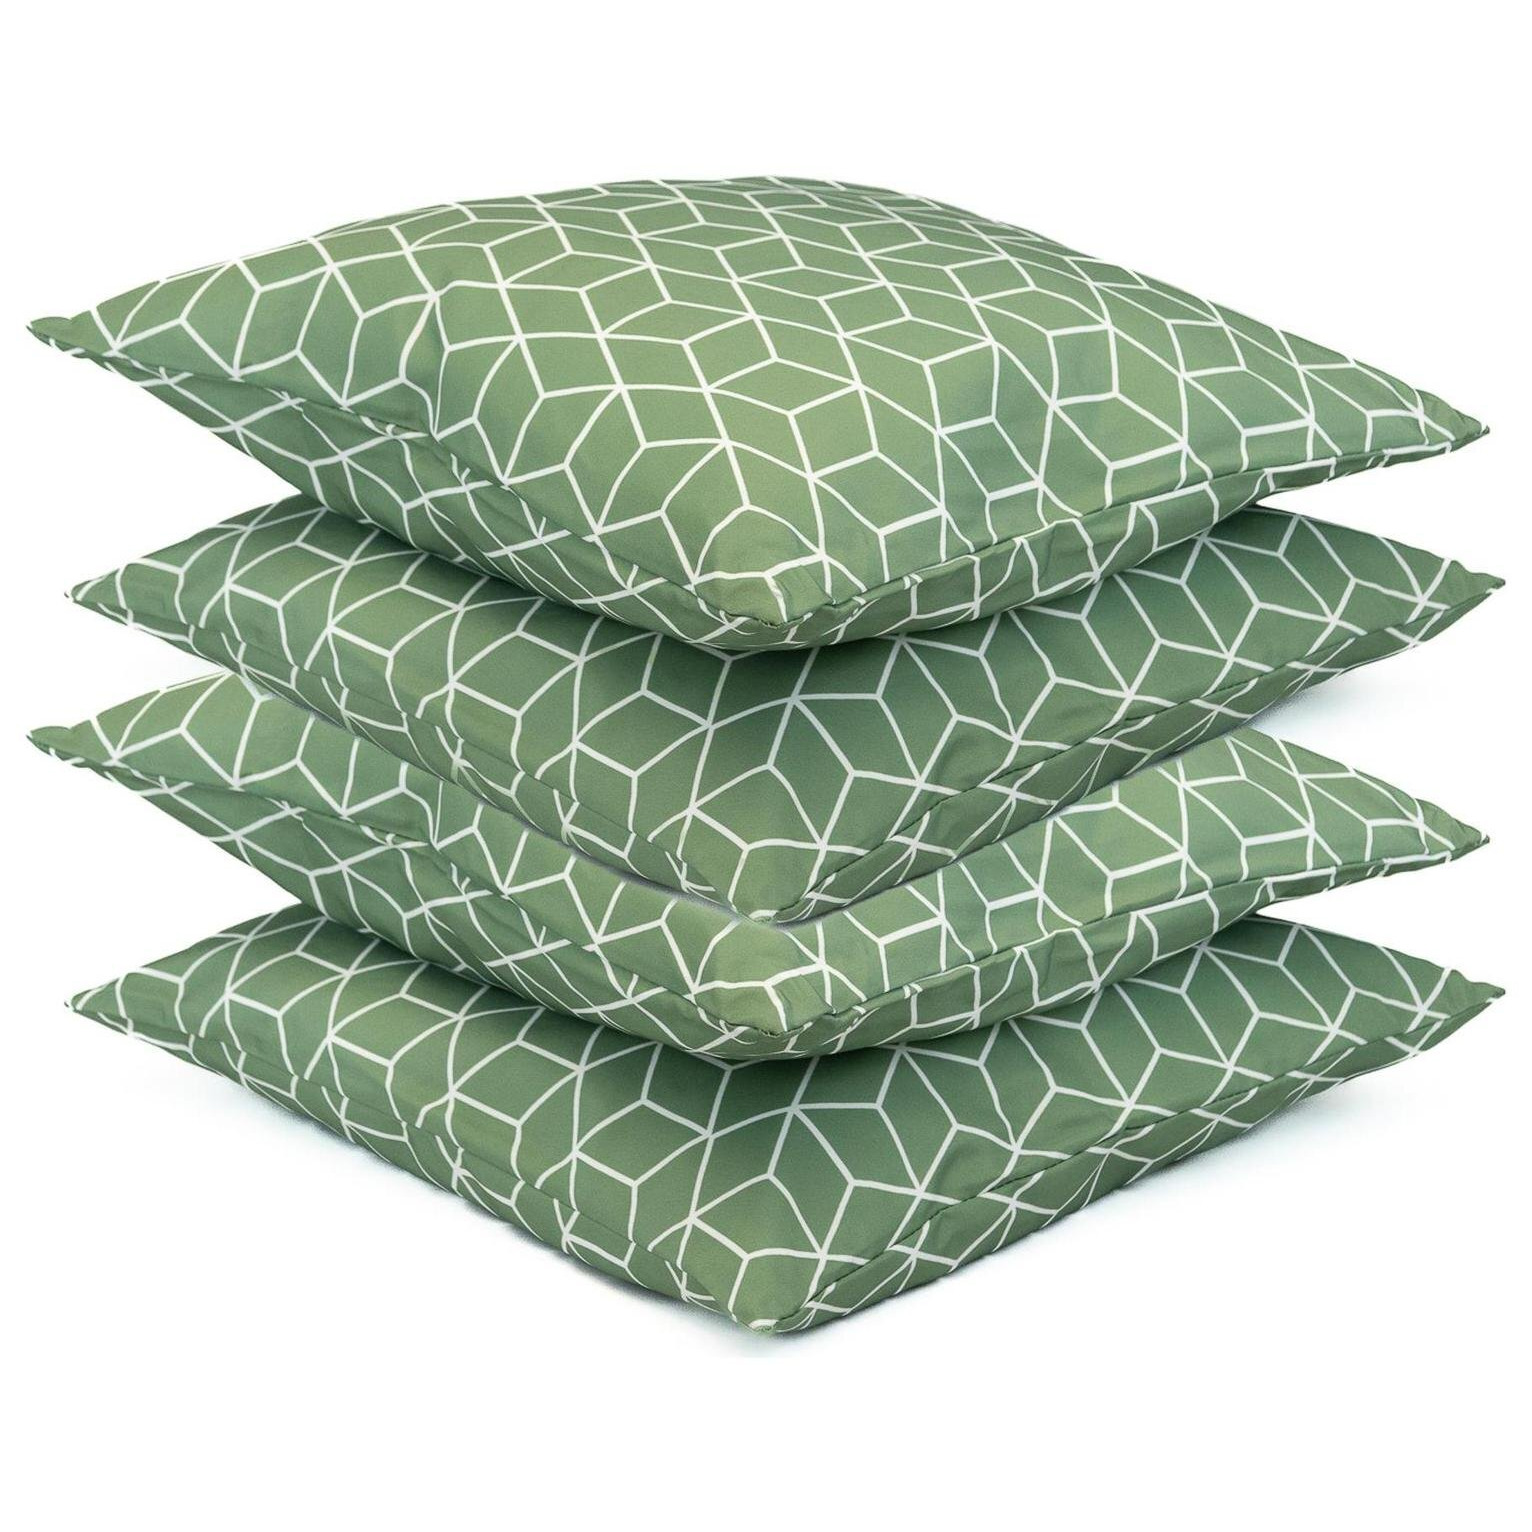 Streetwize Outdoor Cushion Green - Pack of 4 - image 1